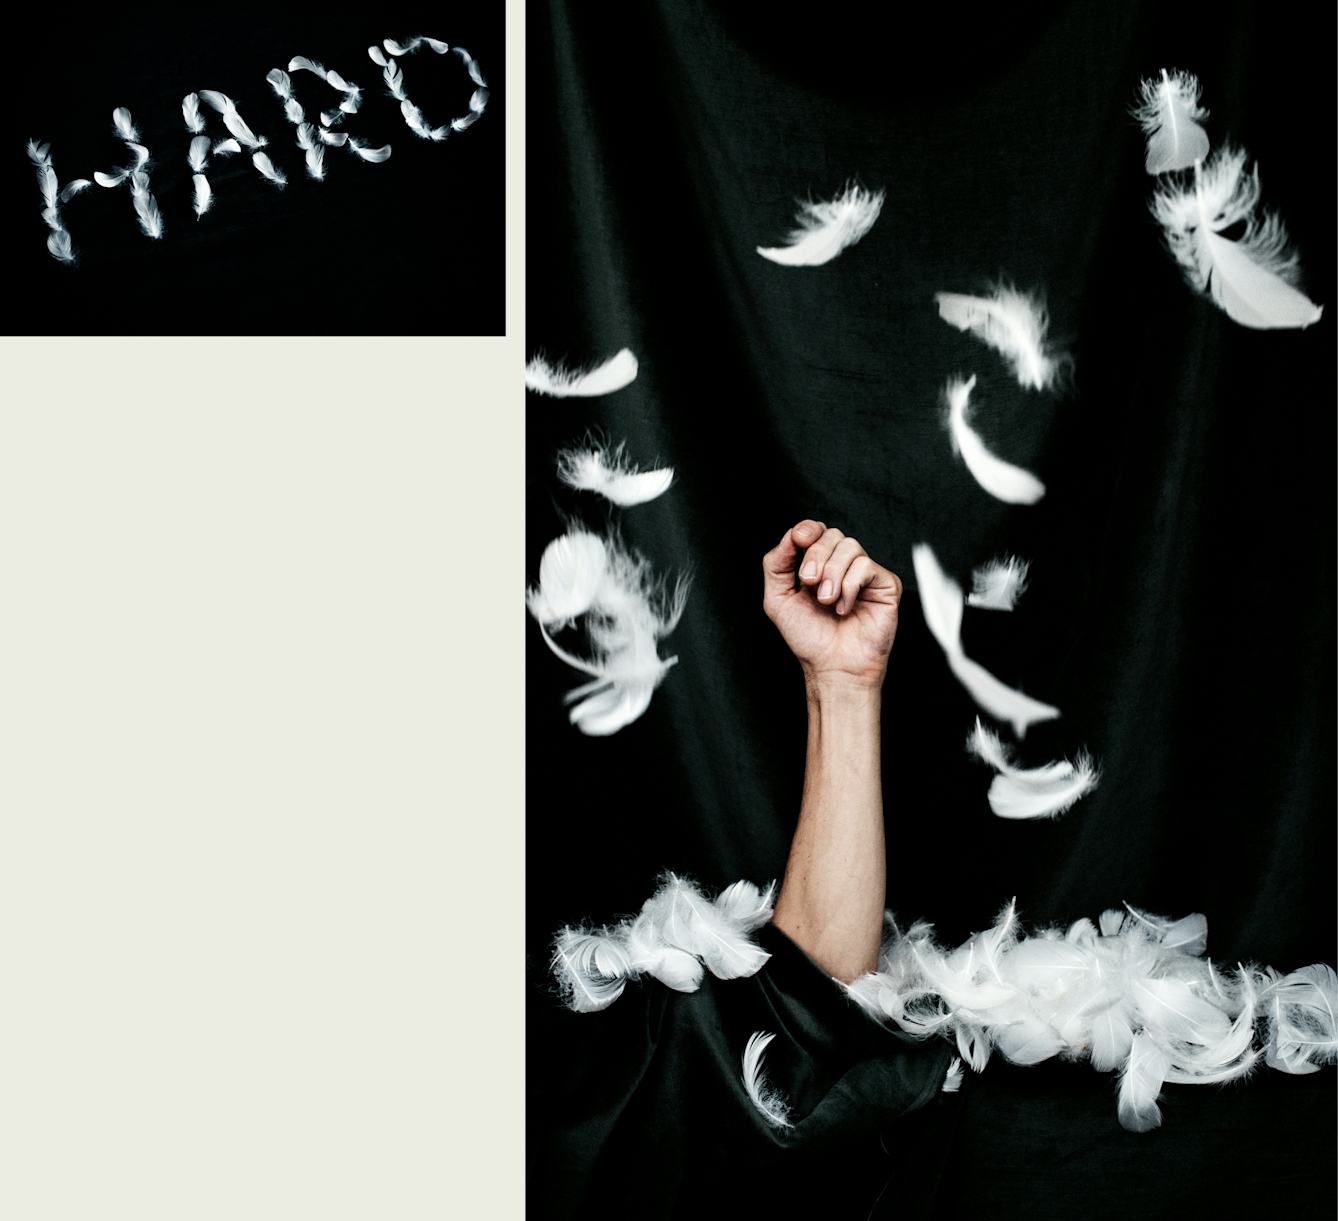 Photographic diptych, one large vertical image on the right and one smaller horizontal image on the left. The one on the right shows an arm and hand emerging vertically through a black velvet background, the fingers lightly curled. Around the arm, collected on the flat surface and floating down in the air are white feathers. The image on the left shows the word 'HARD' spelt out with white feathers, resting on a black background.